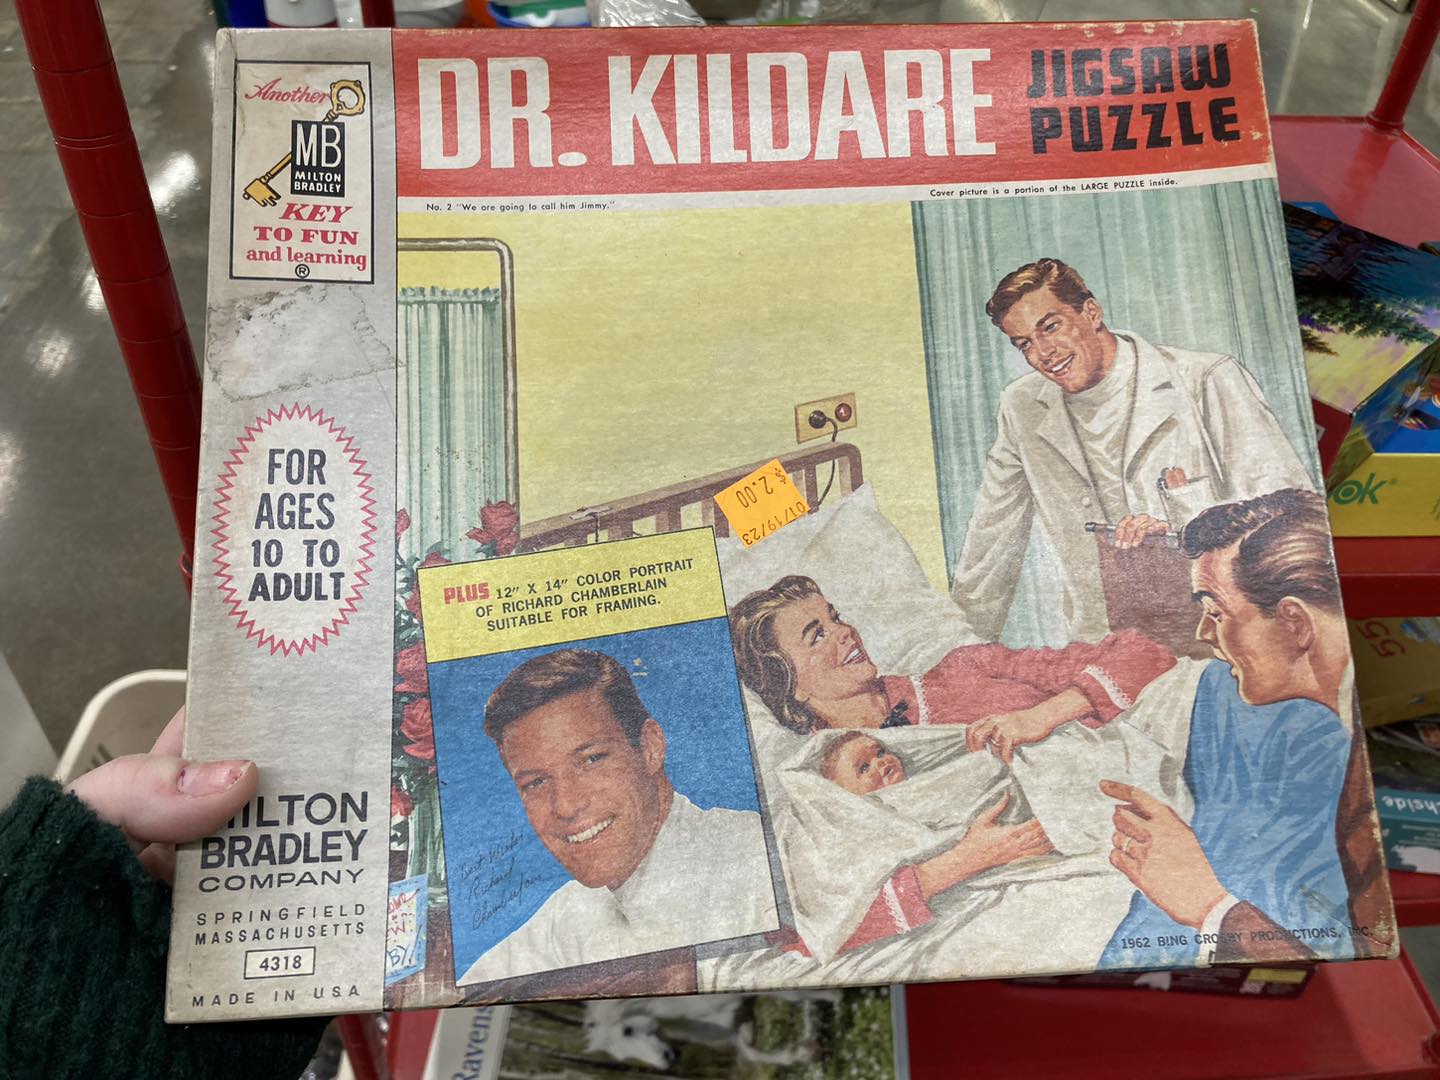 An old Dr. Kildare jigsaw puzzle box. The picture on the front is of a women in a hospital bed holding a baby, with a doctor in a lab coat looking over and a man at the end of the bed talking.